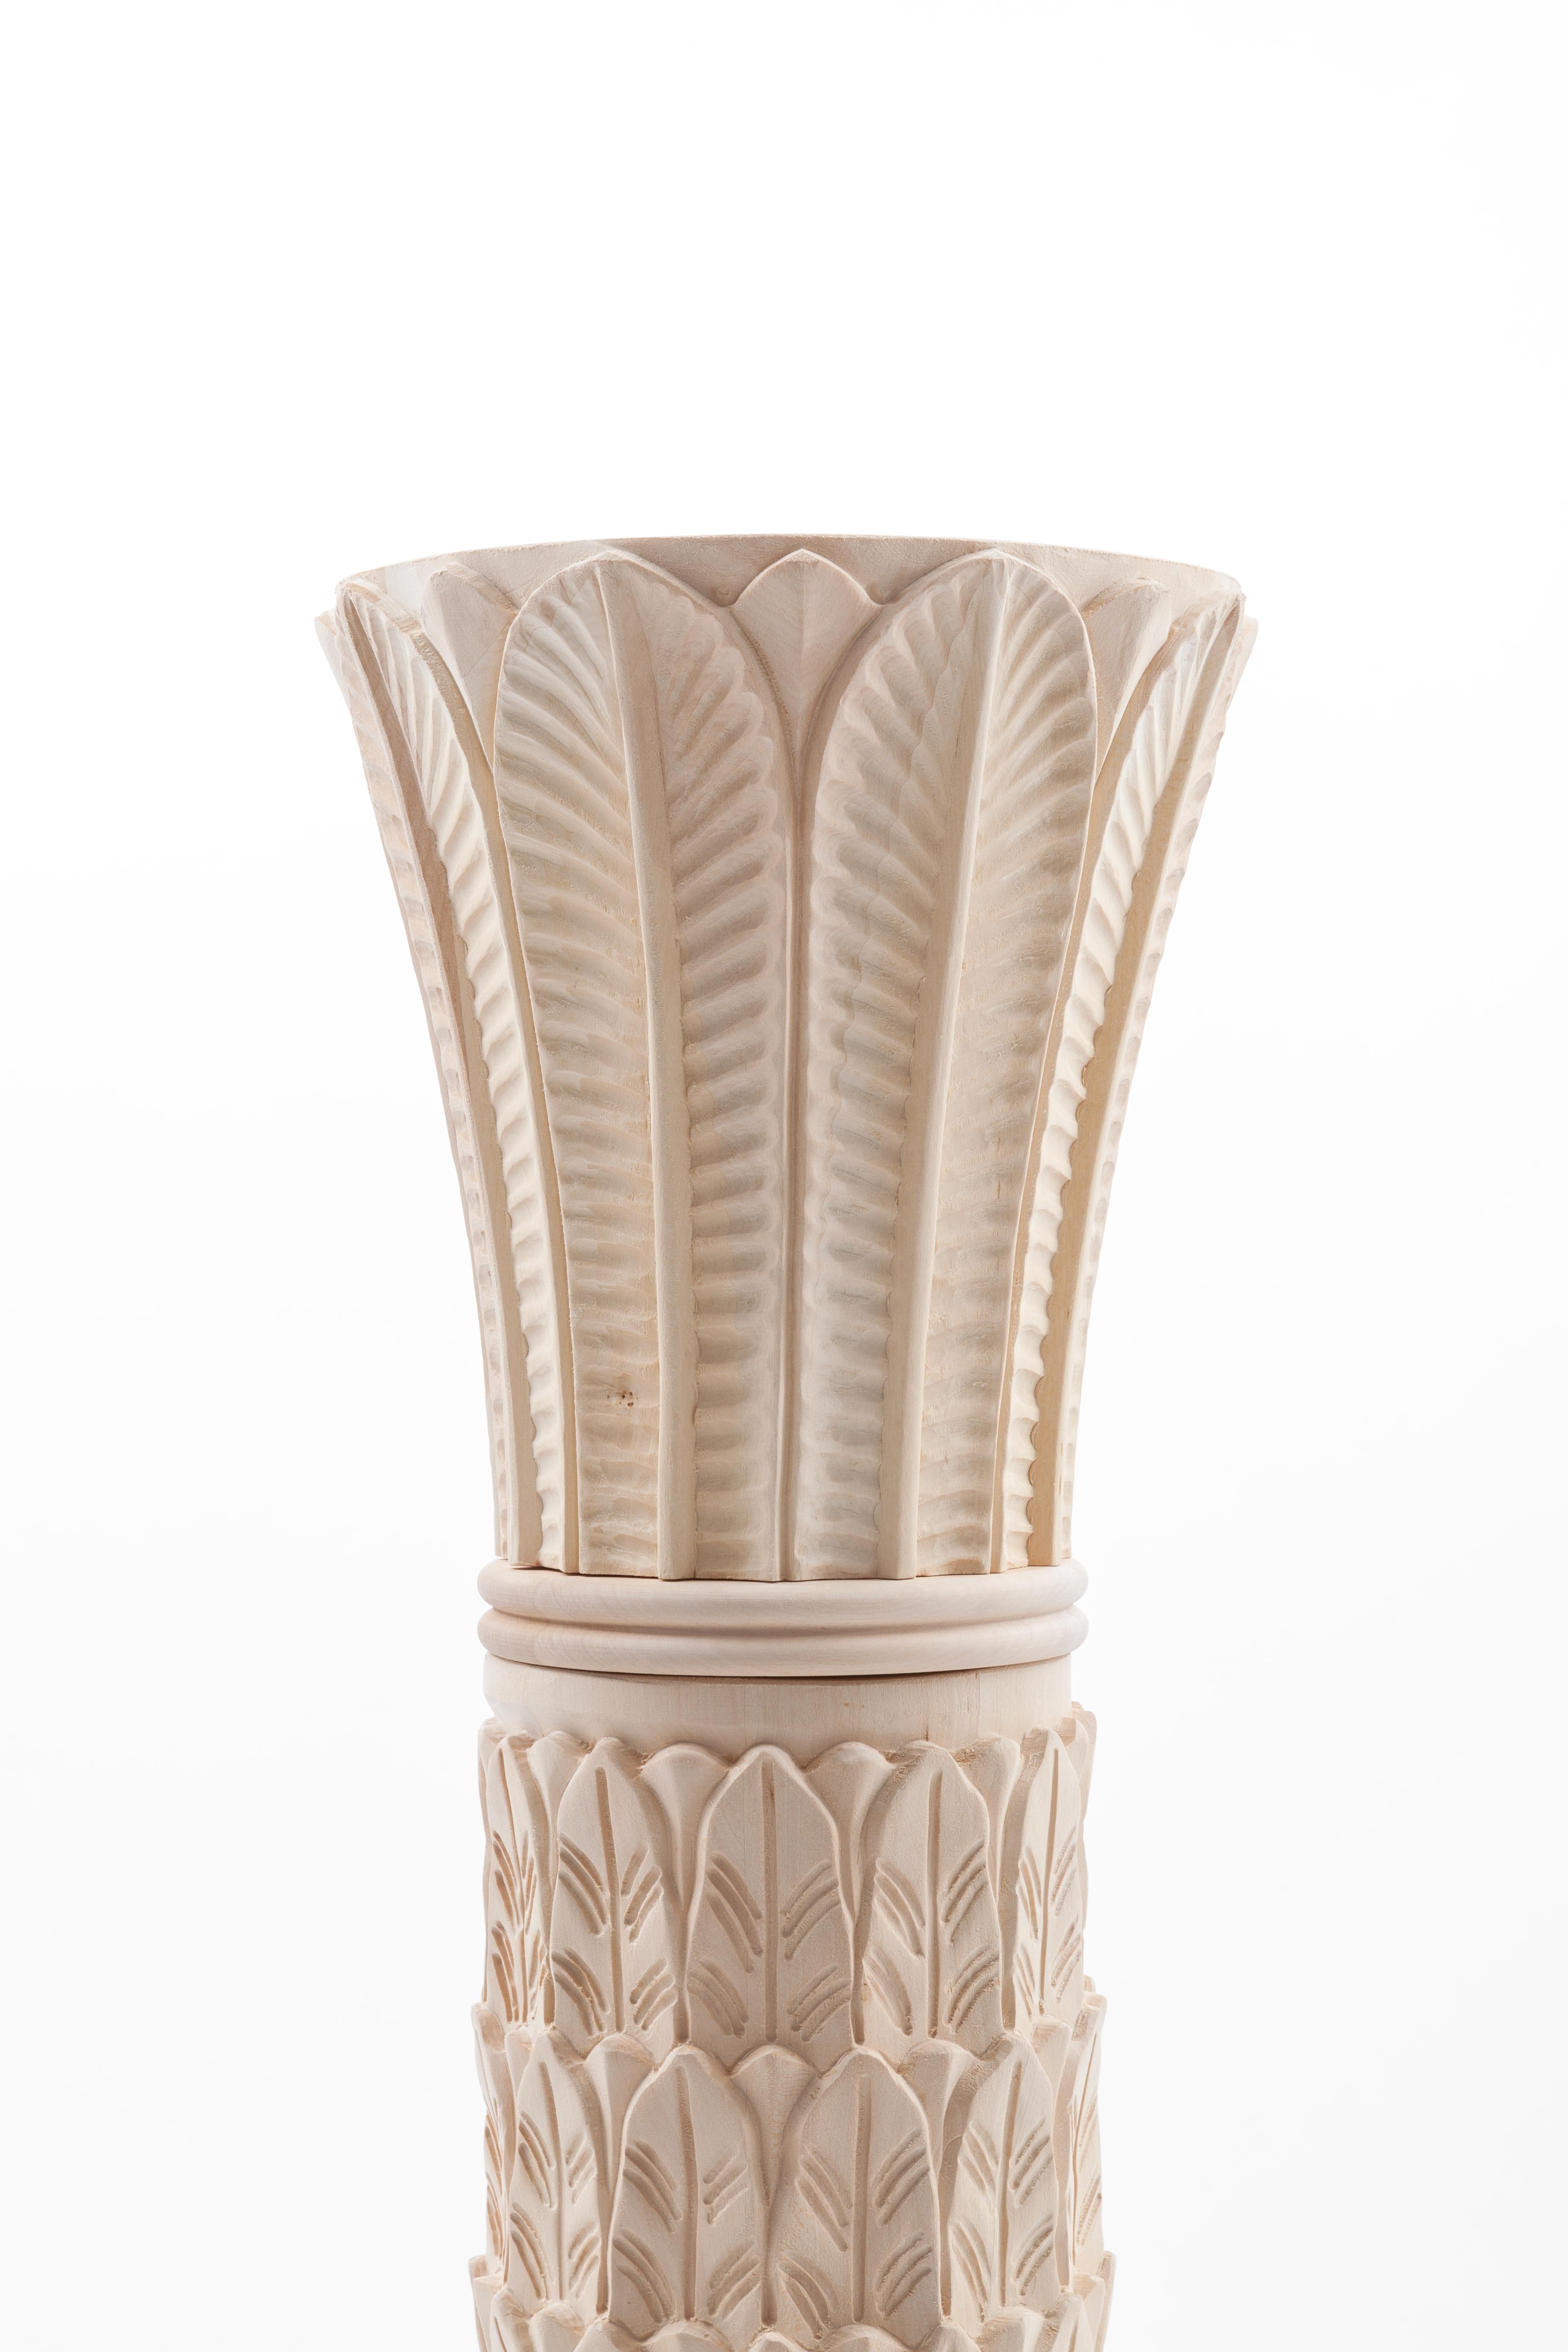 The Anne column is our attempt at bringing together modern workmanship and traditional craftsmanship.
It is made in Italy of natural linden wood and entirely hand finished rendering no two pieces exactly the same. 
We strive to help keep alive our